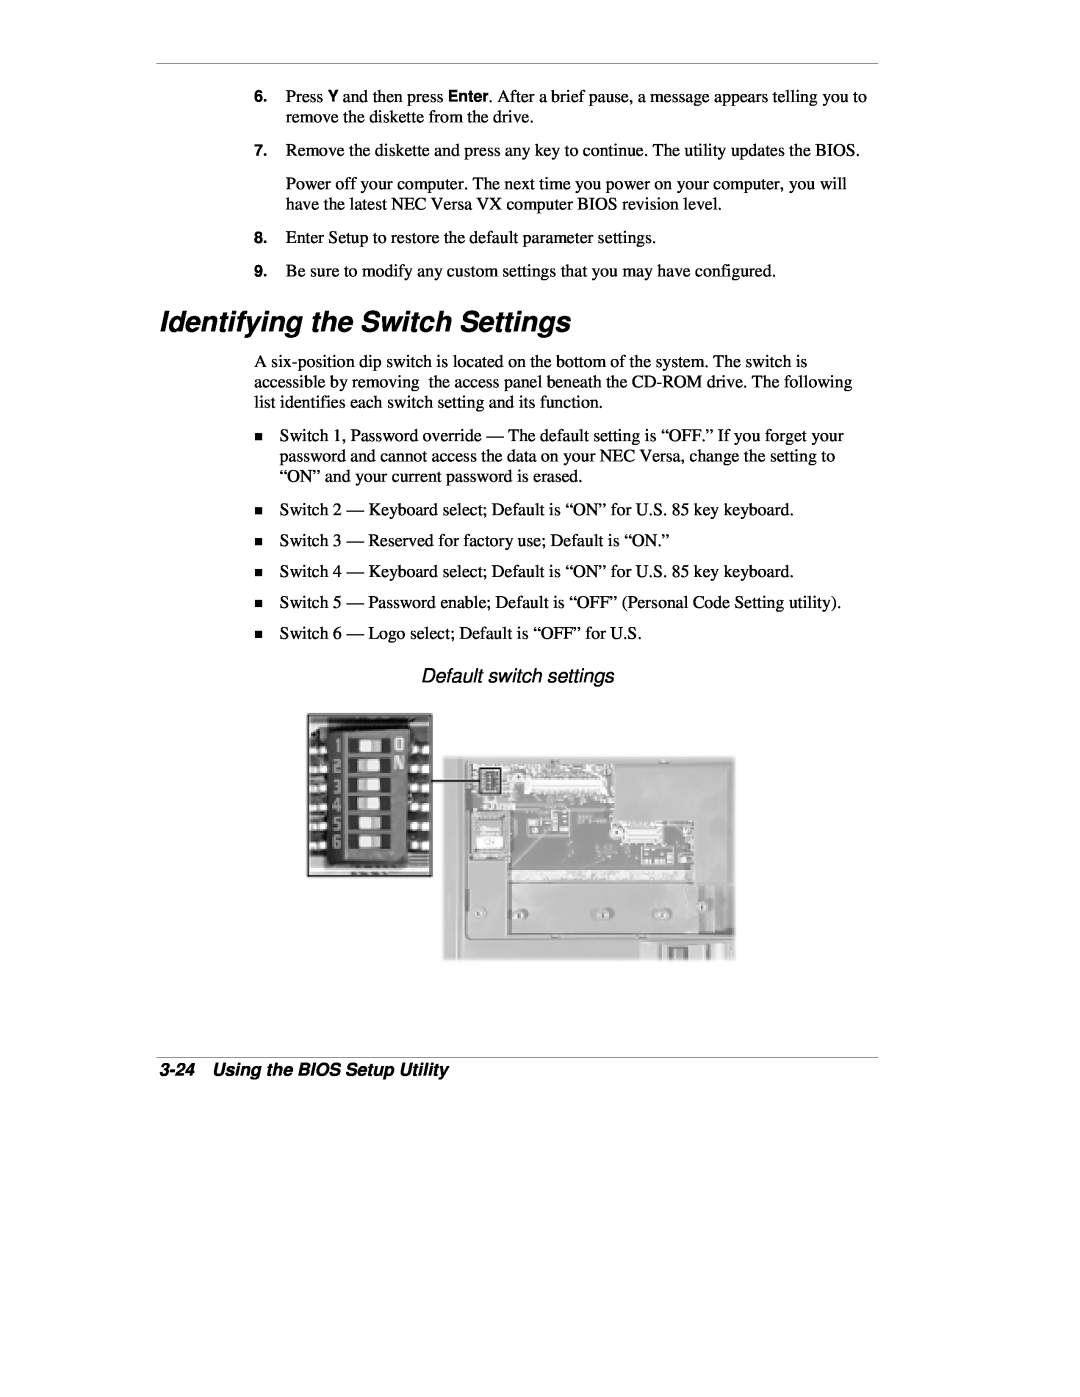 NEC VX manual Identifying the Switch Settings, Default switch settings, Using the BIOS Setup Utility 